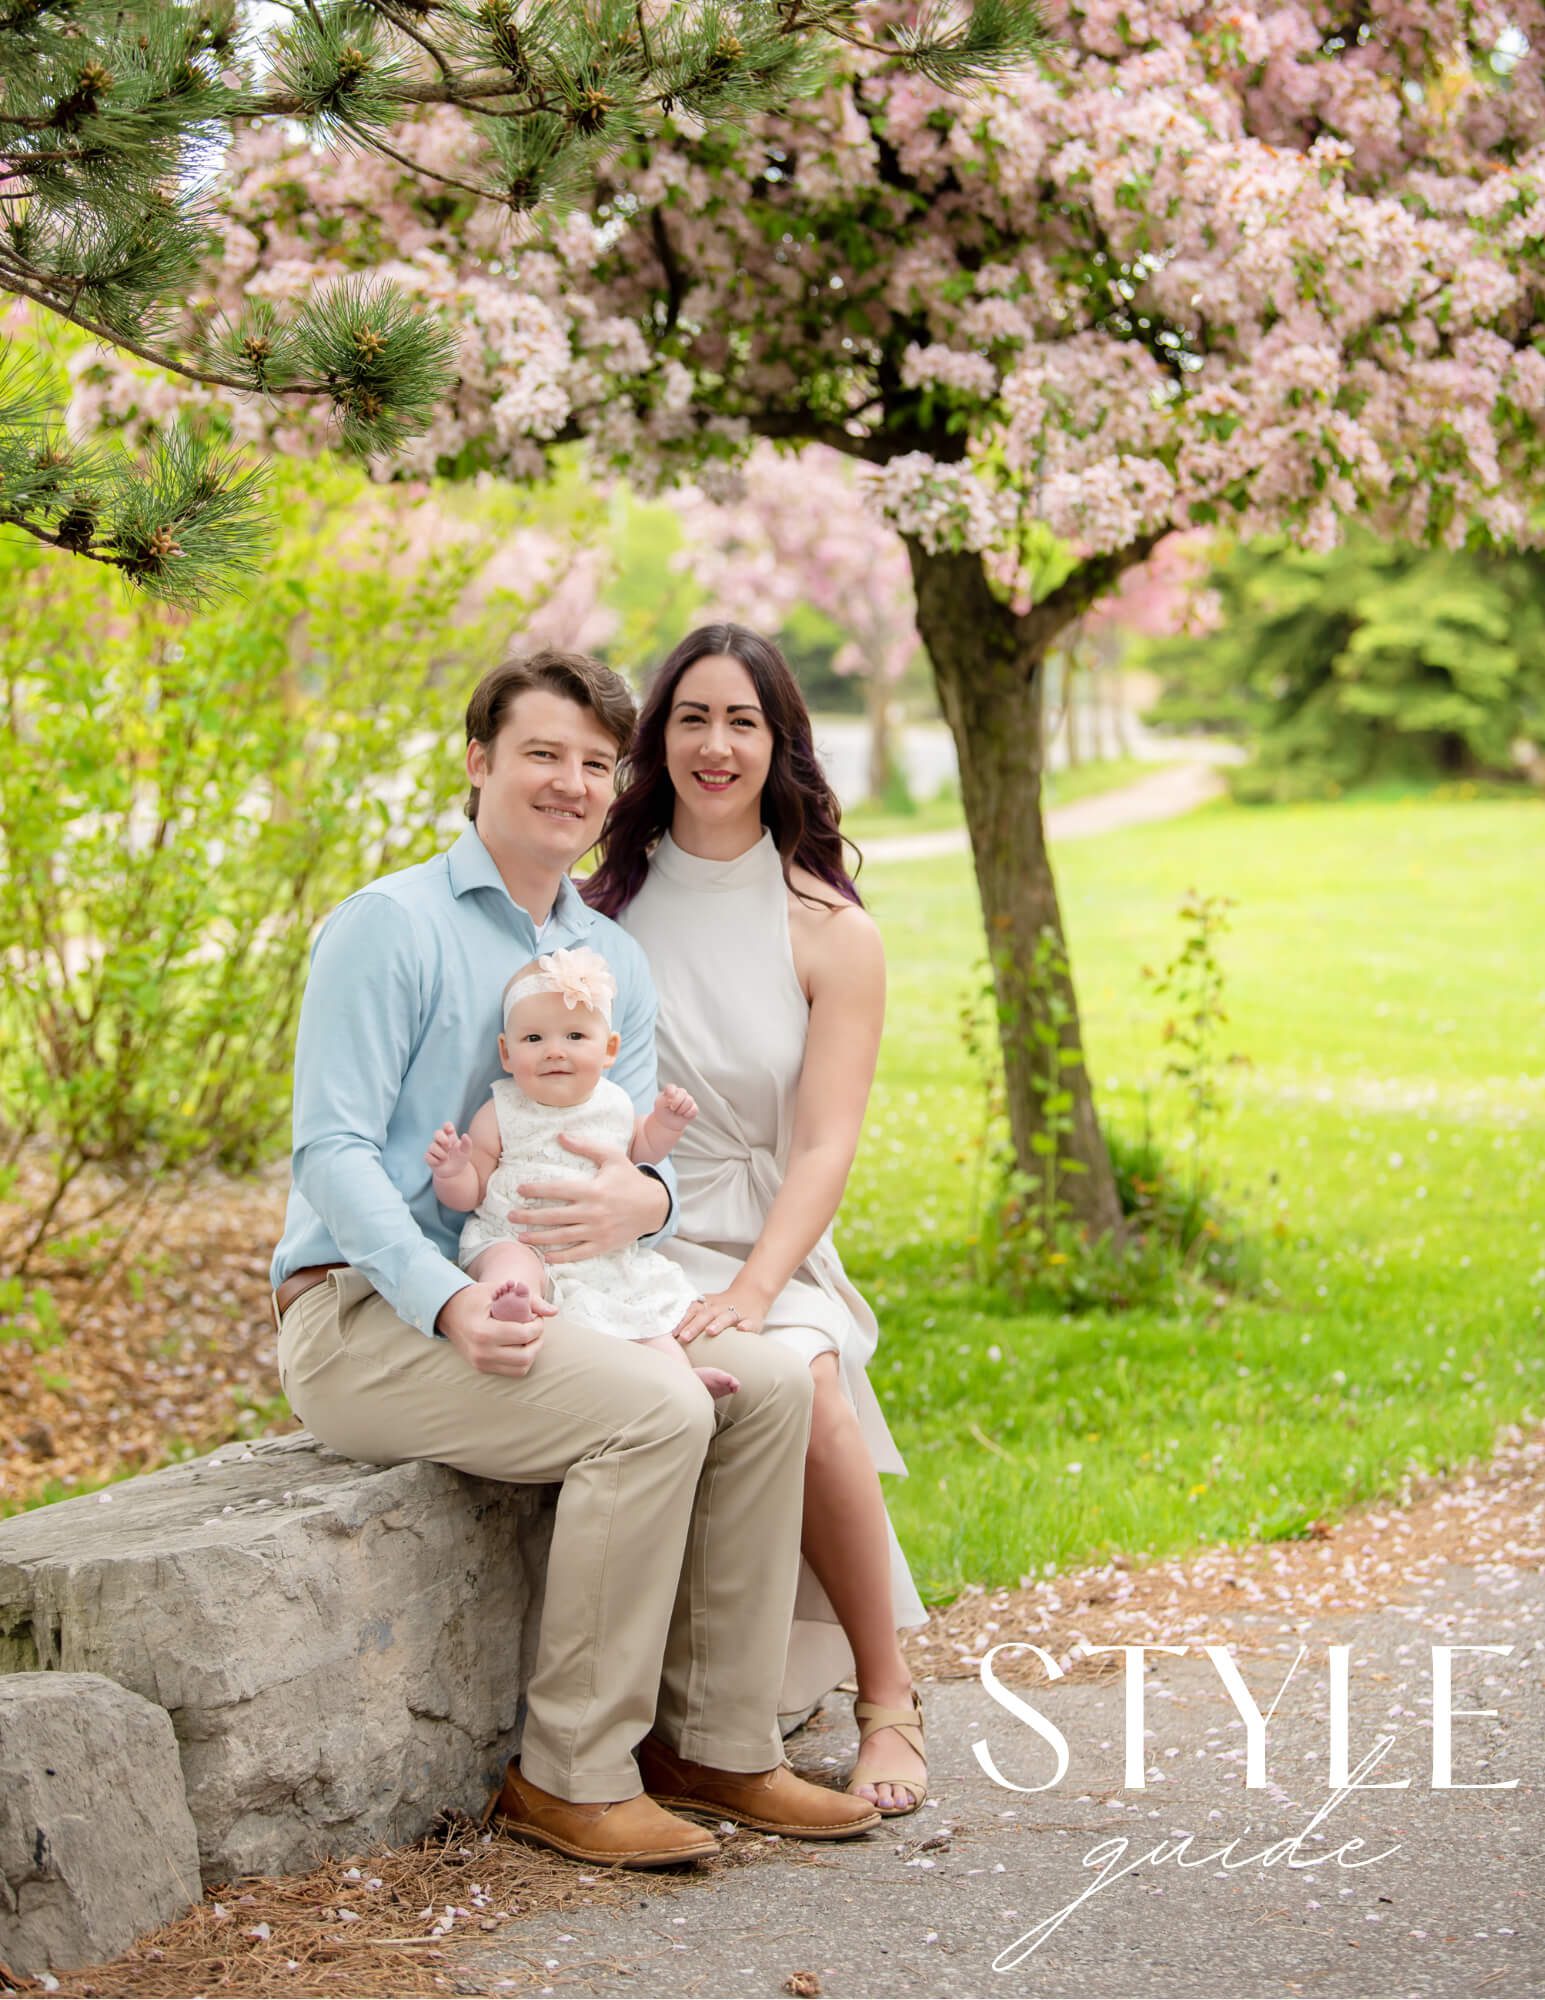 Burlington Ontario Family photography session outdoor at the cherry blossoms